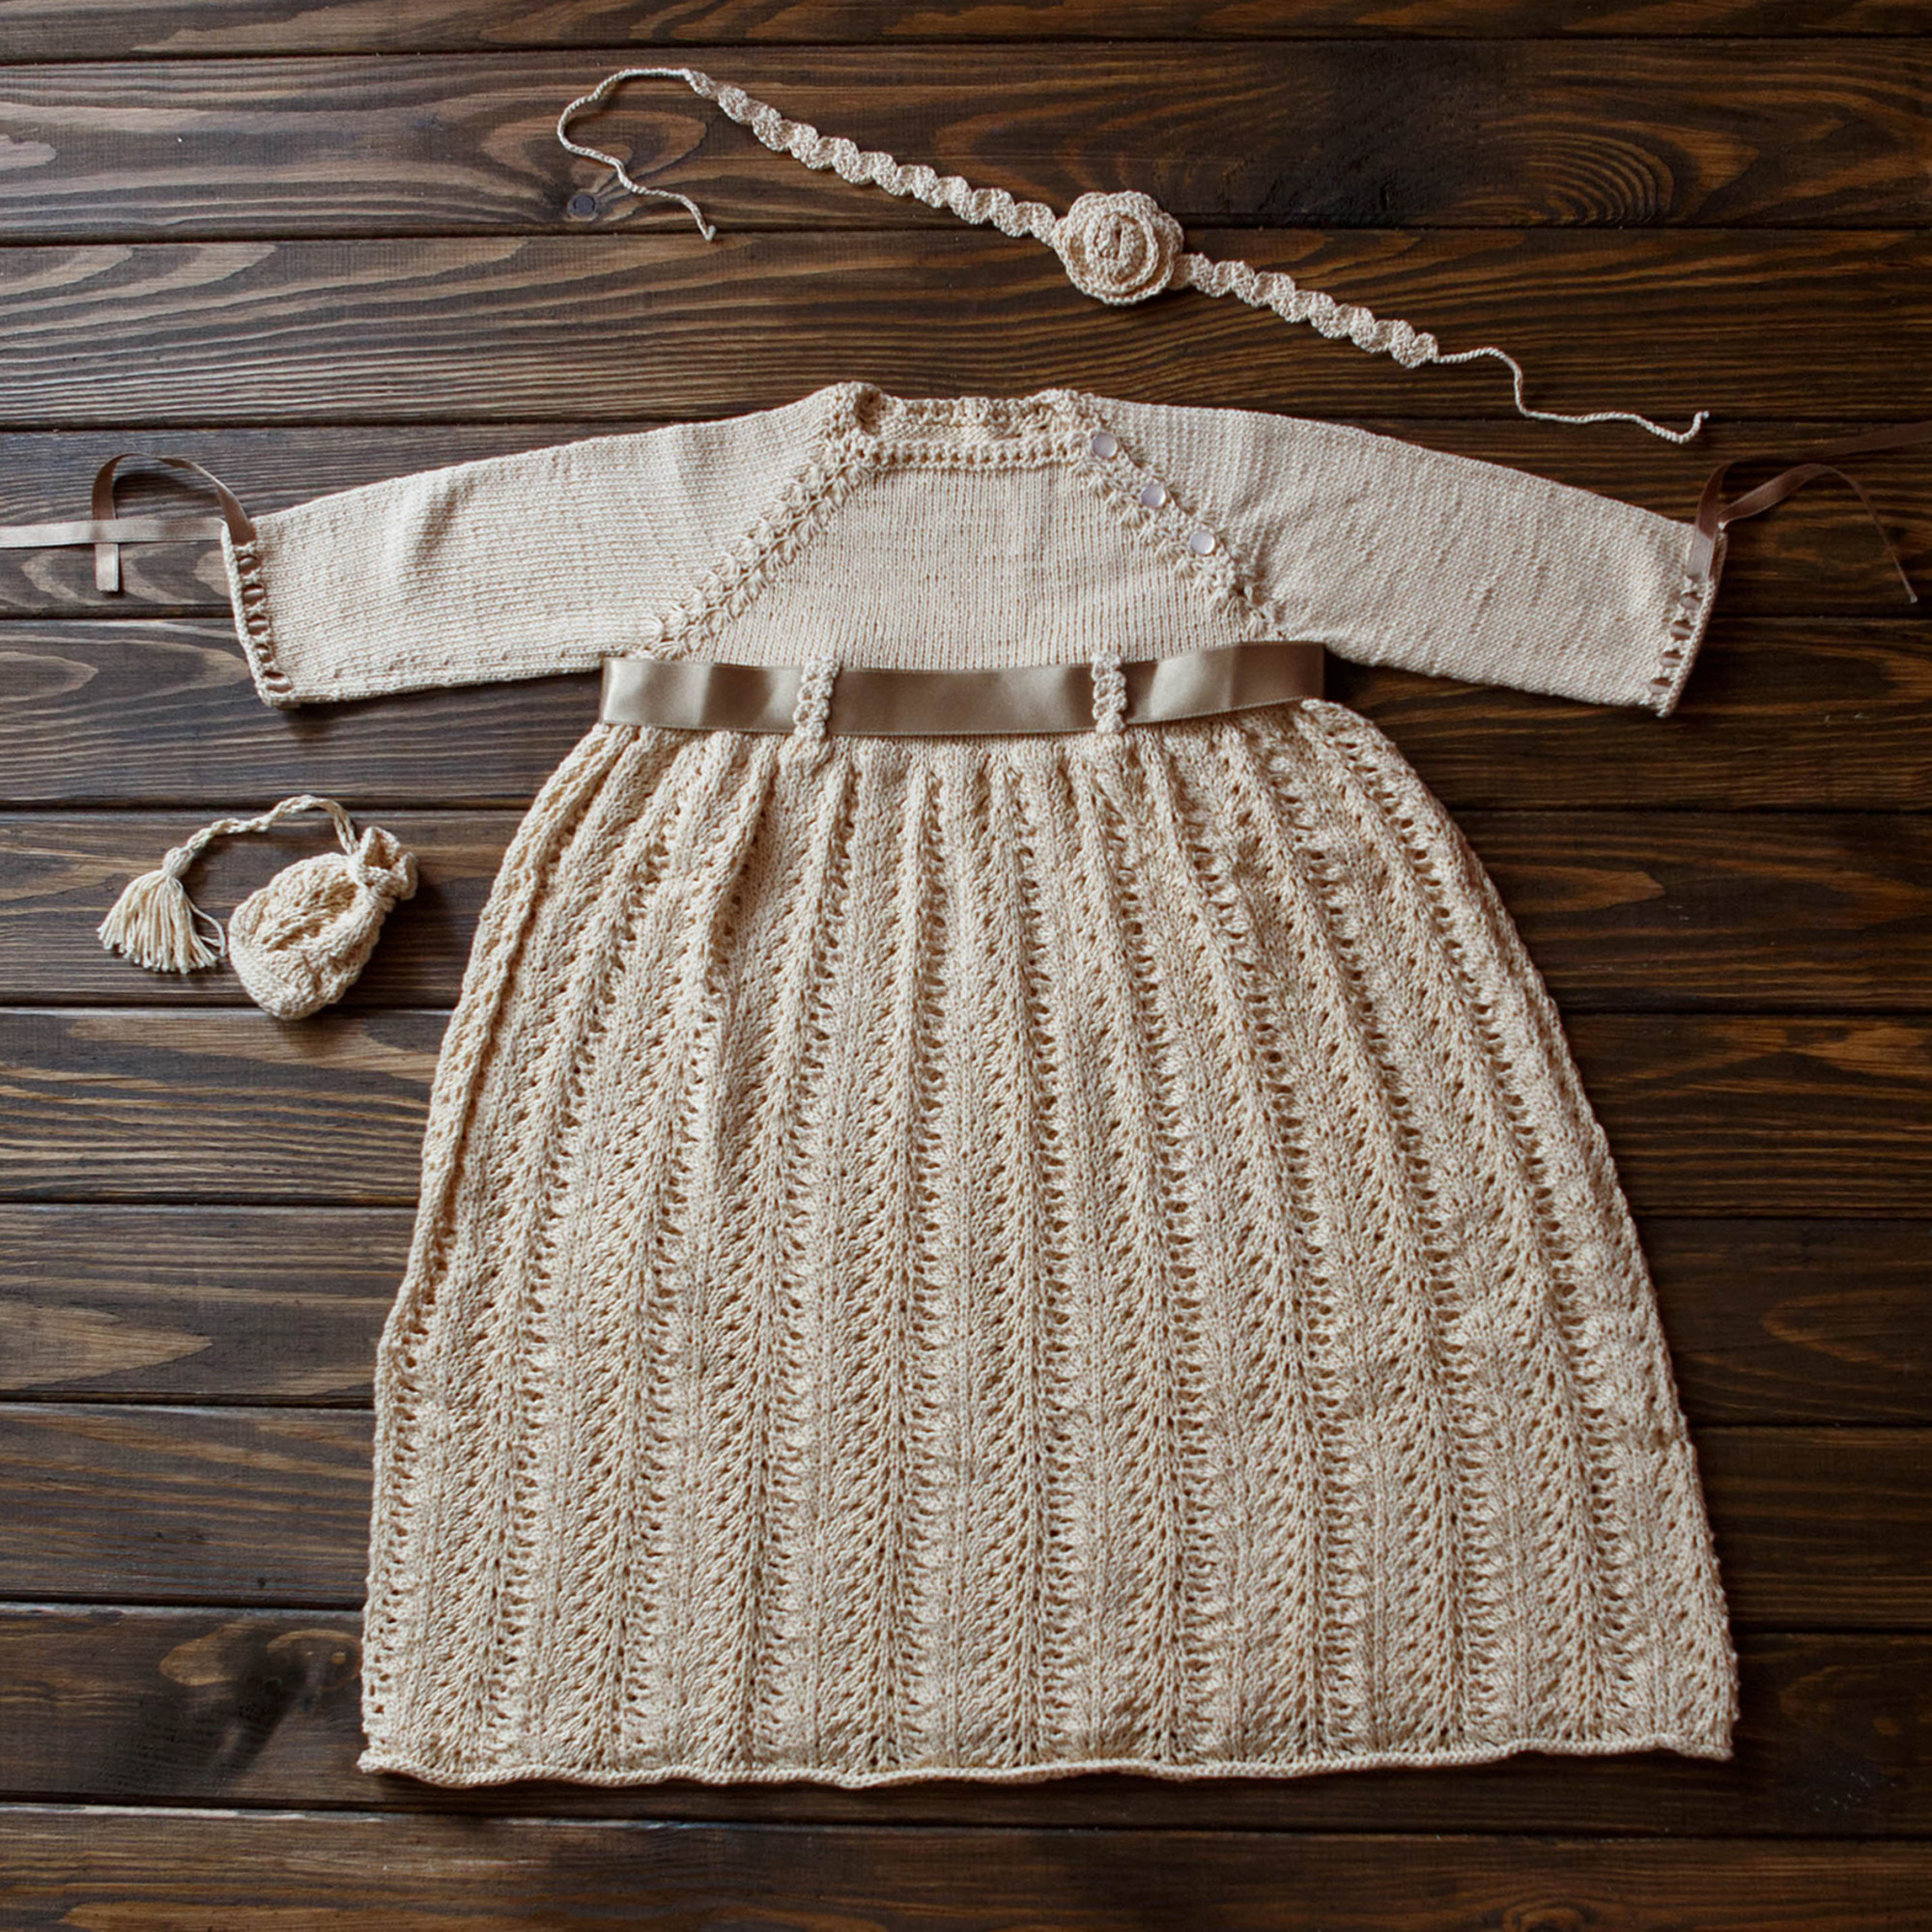 Baby Baptism Gown with Drawstring Bag & Headband, 10-12 months